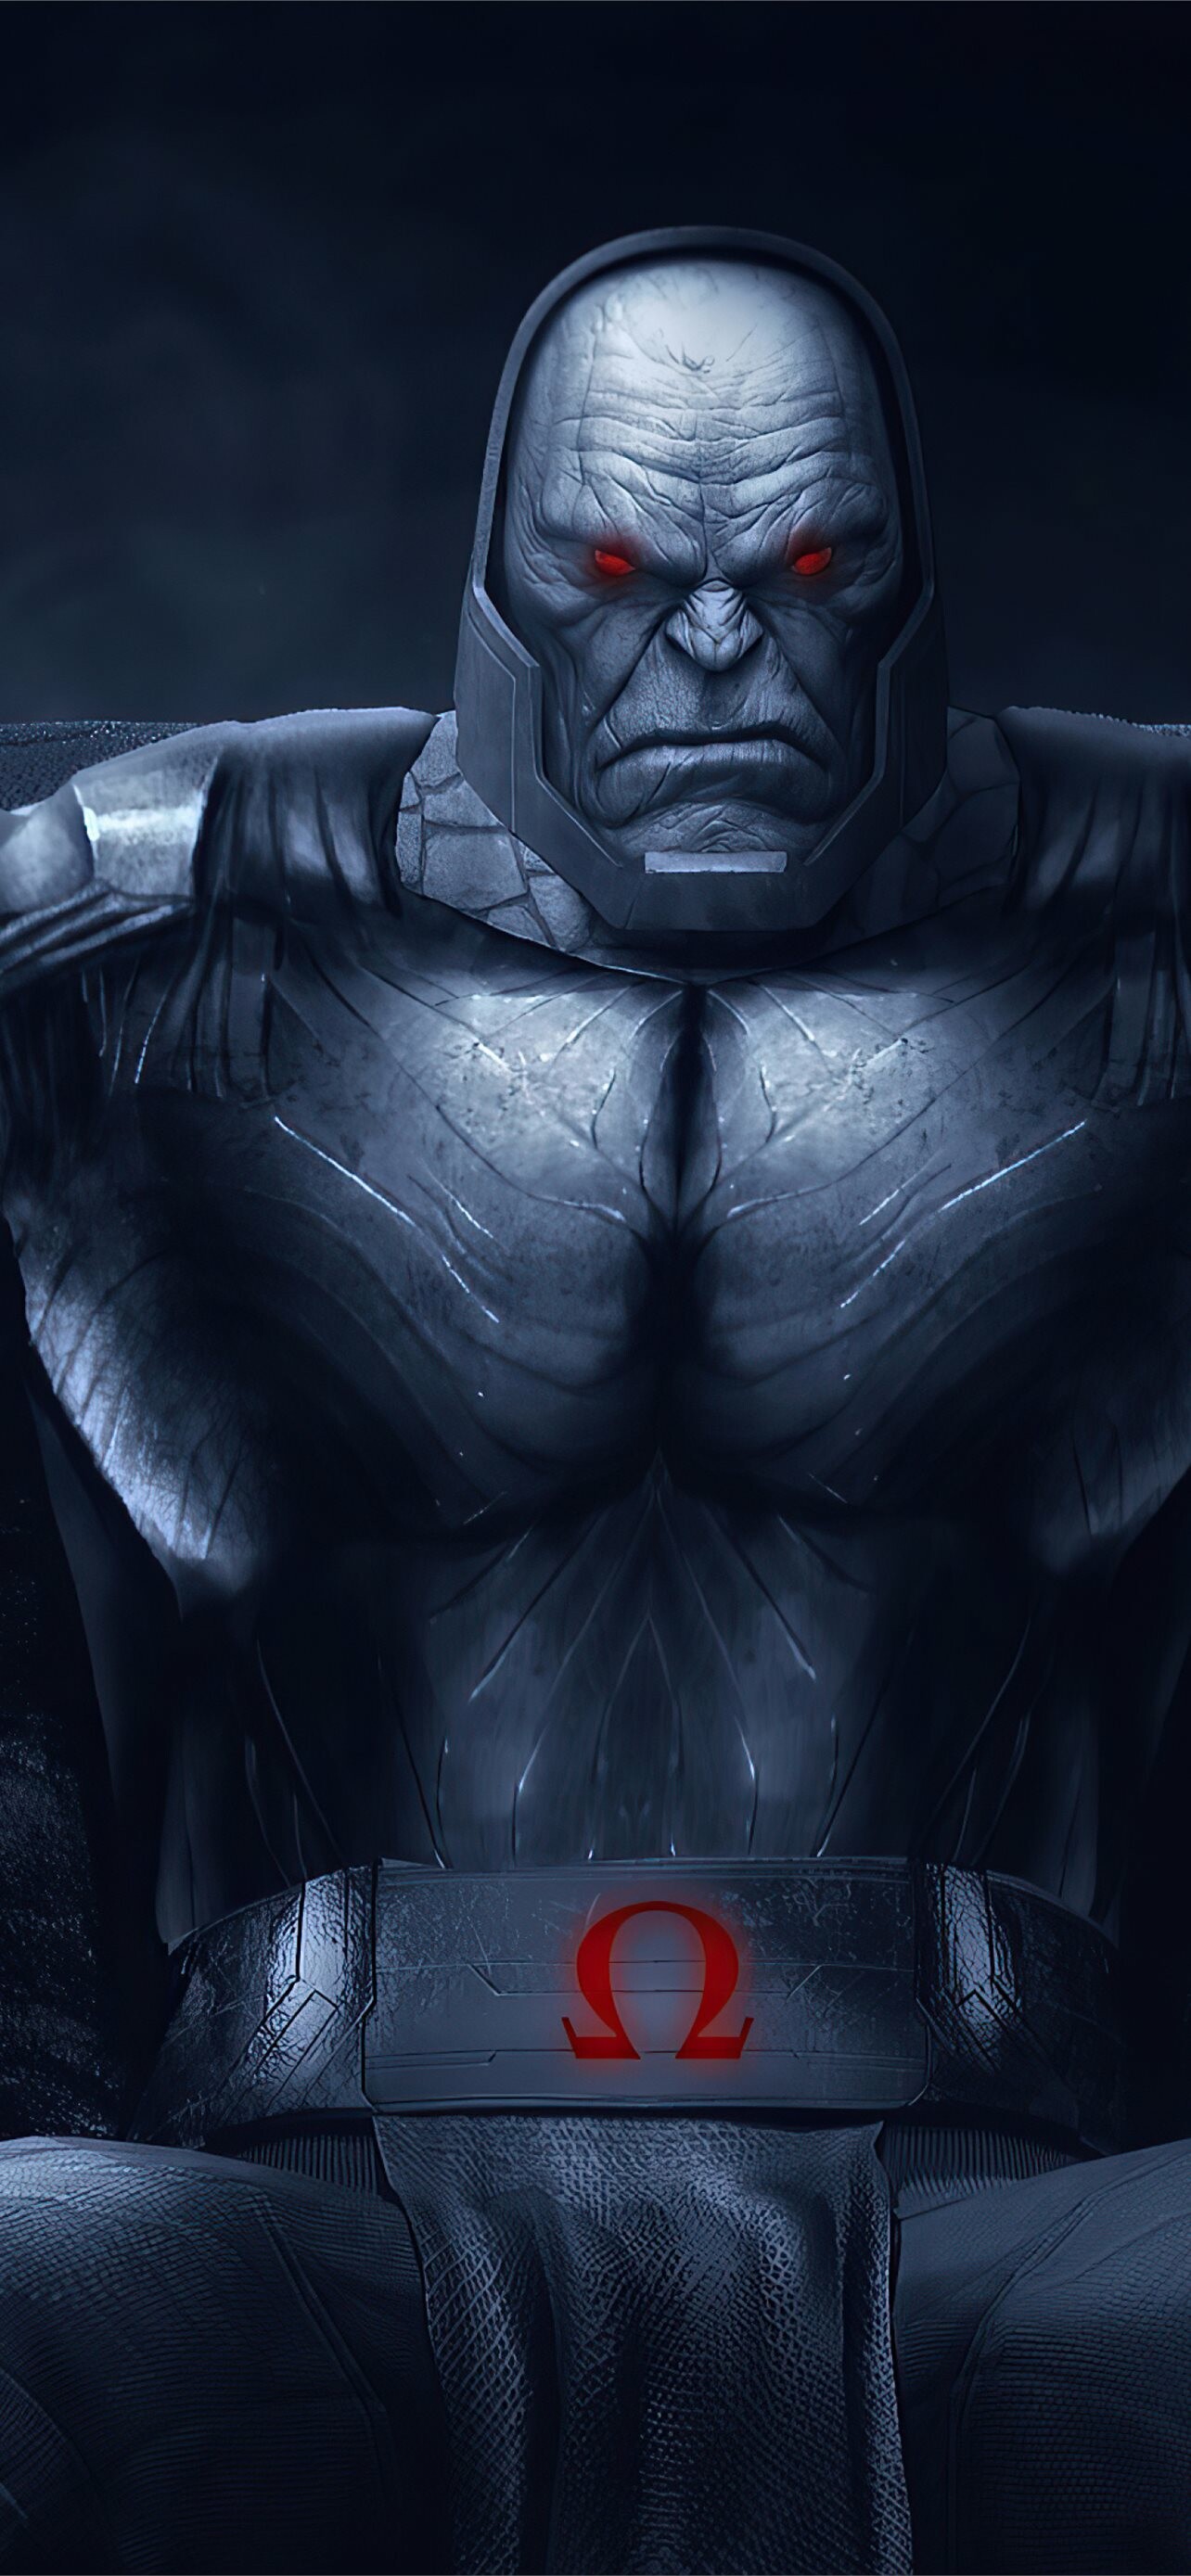 DC Villain: Darkseid, A New God and the tyrannical Lord of Apokolips. 1290x2780 HD Background.